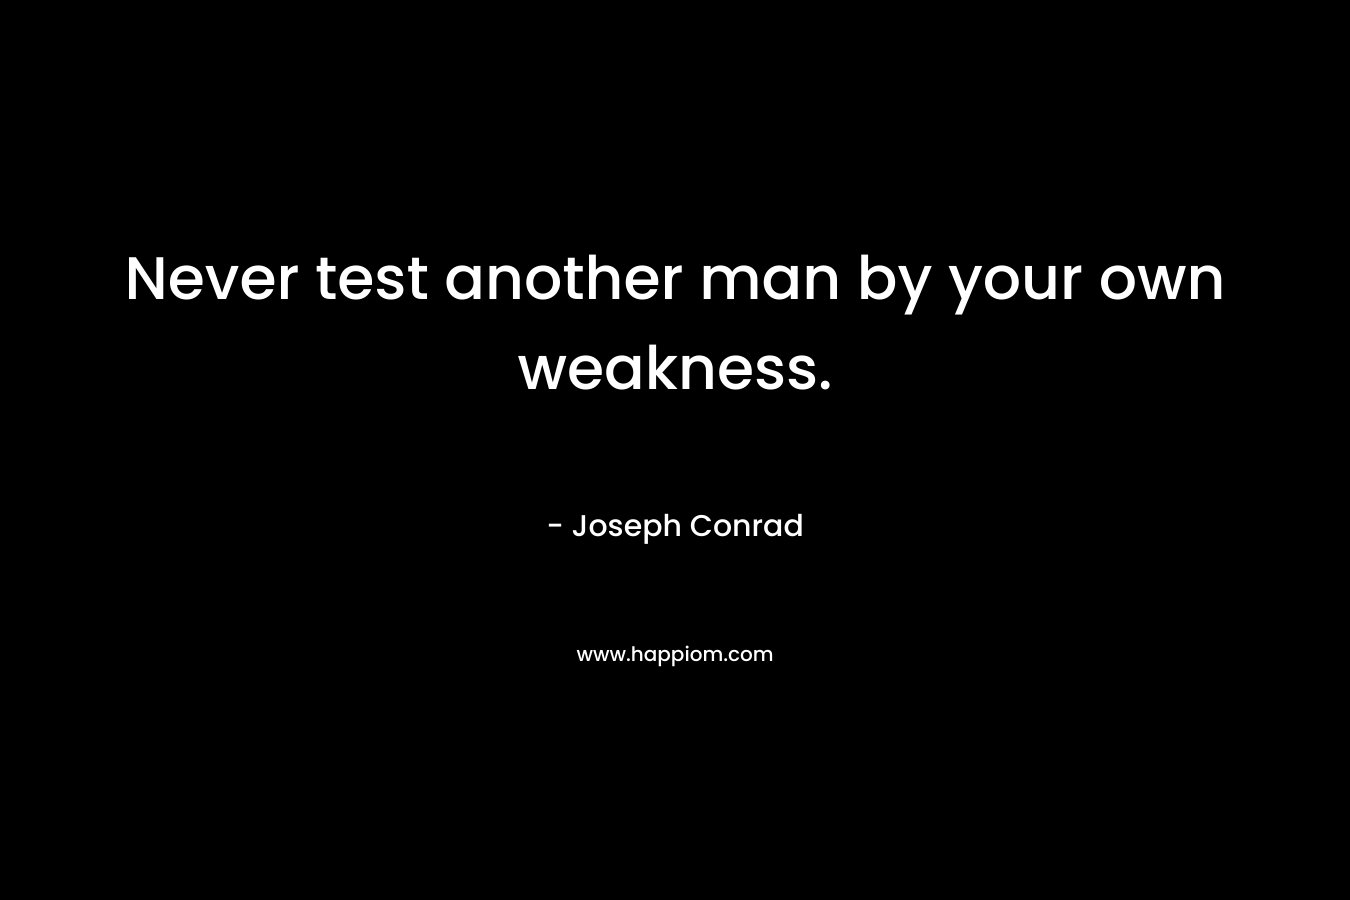 Never test another man by your own weakness.